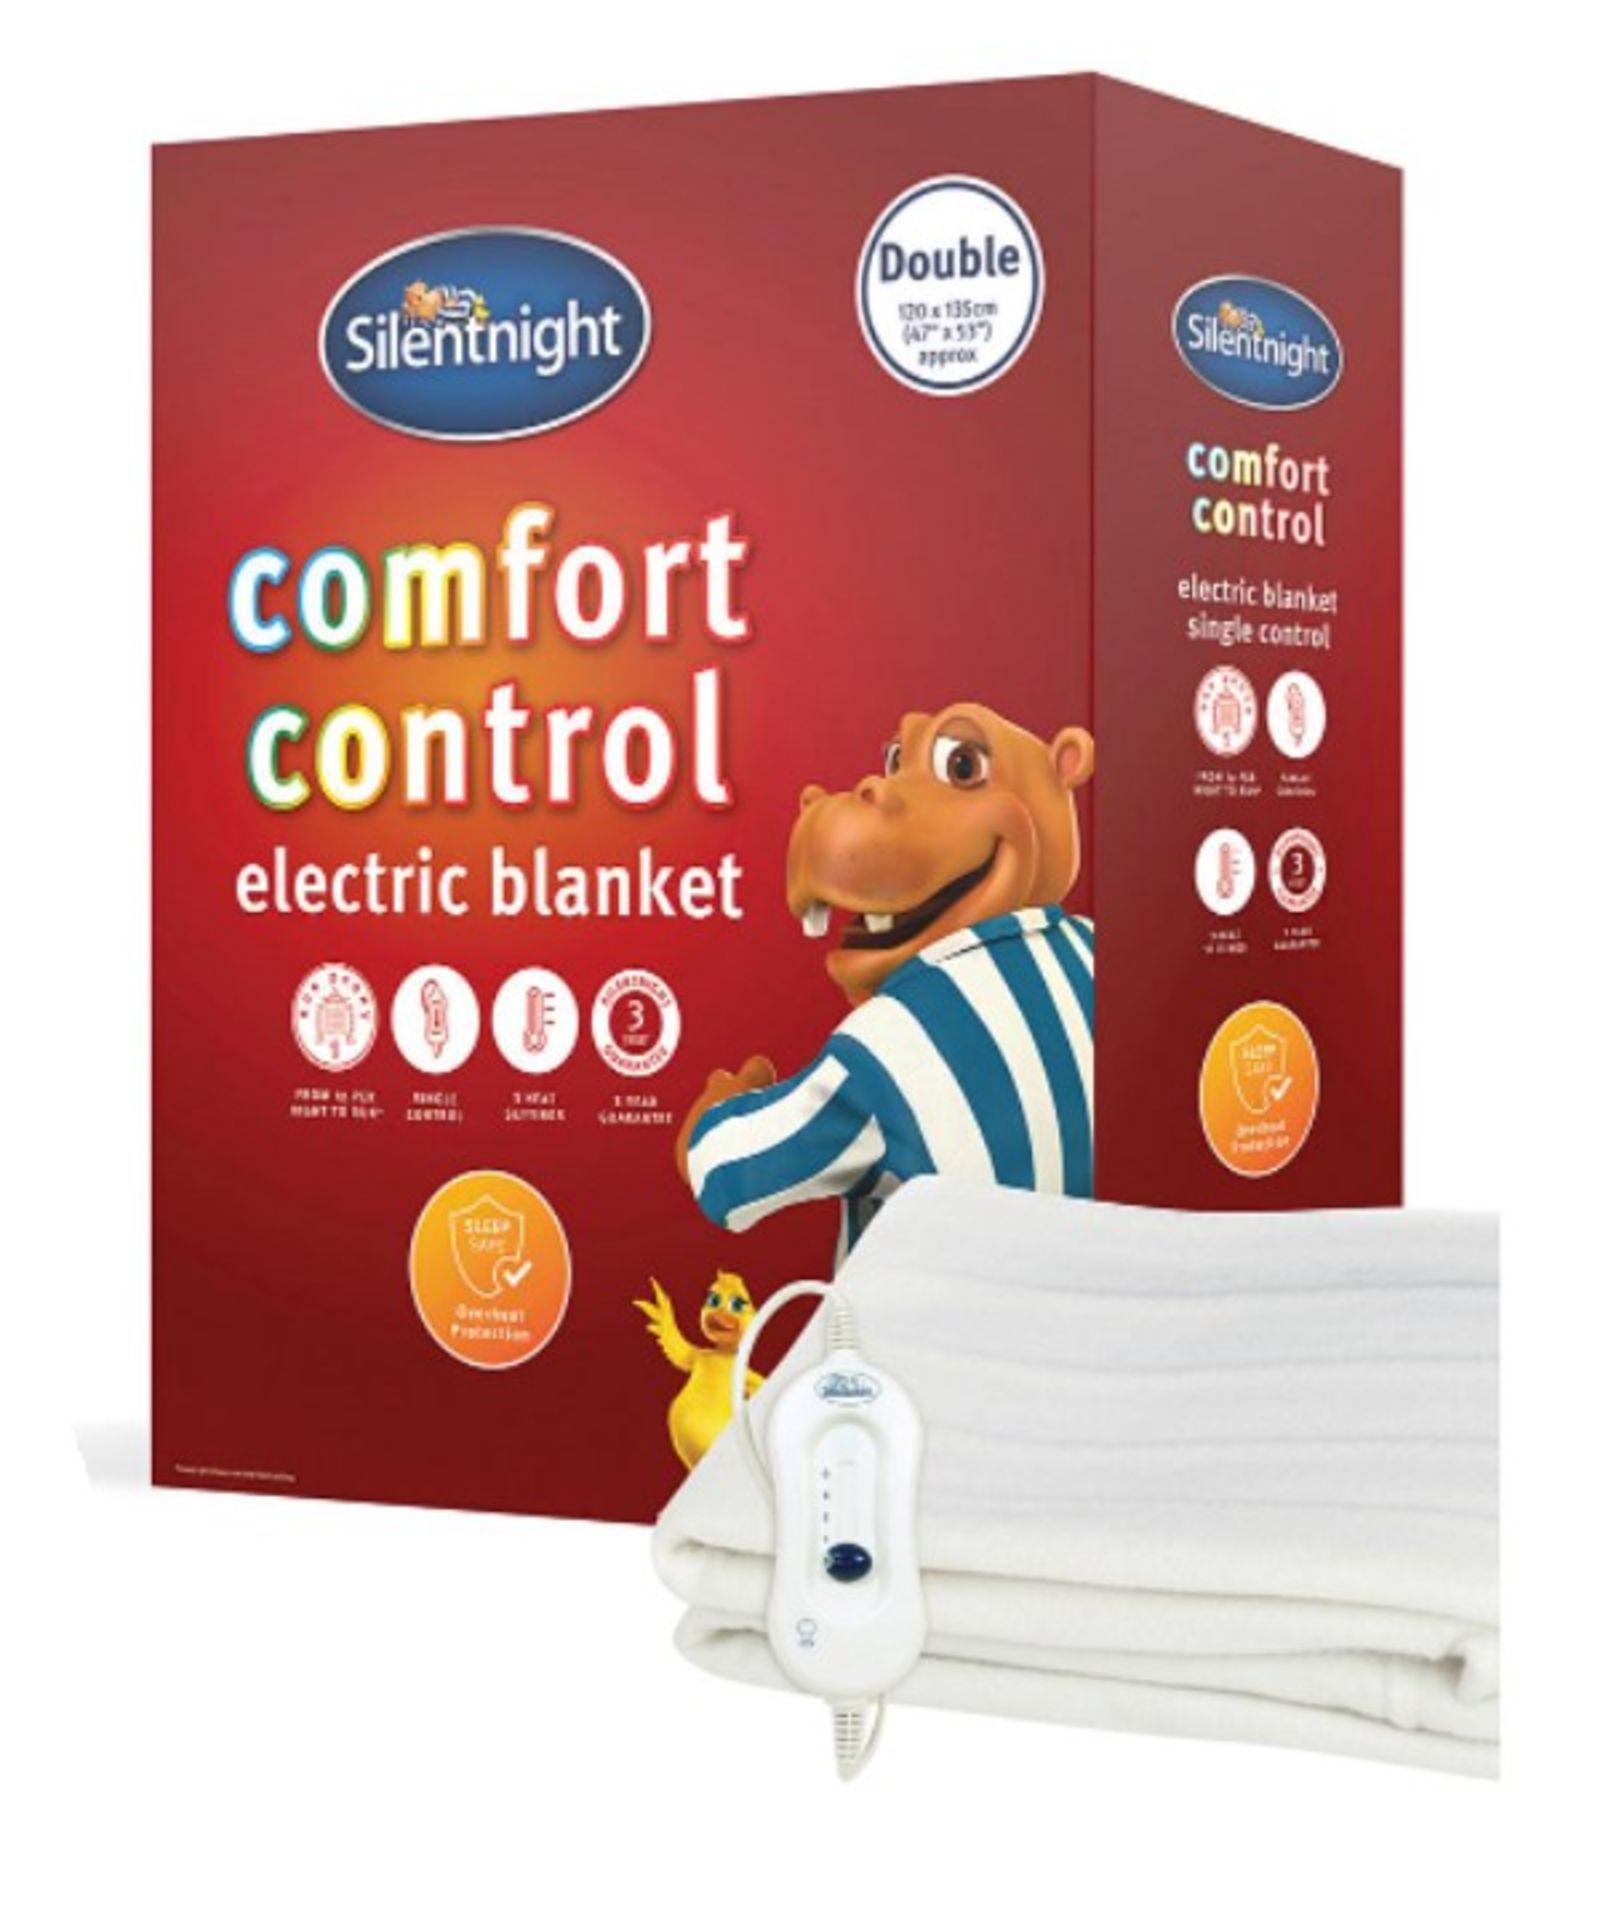 (54/8I) 4x Silentnight Comfort Control Electric Blanket Double RRP £35 Each. (All Units Appear